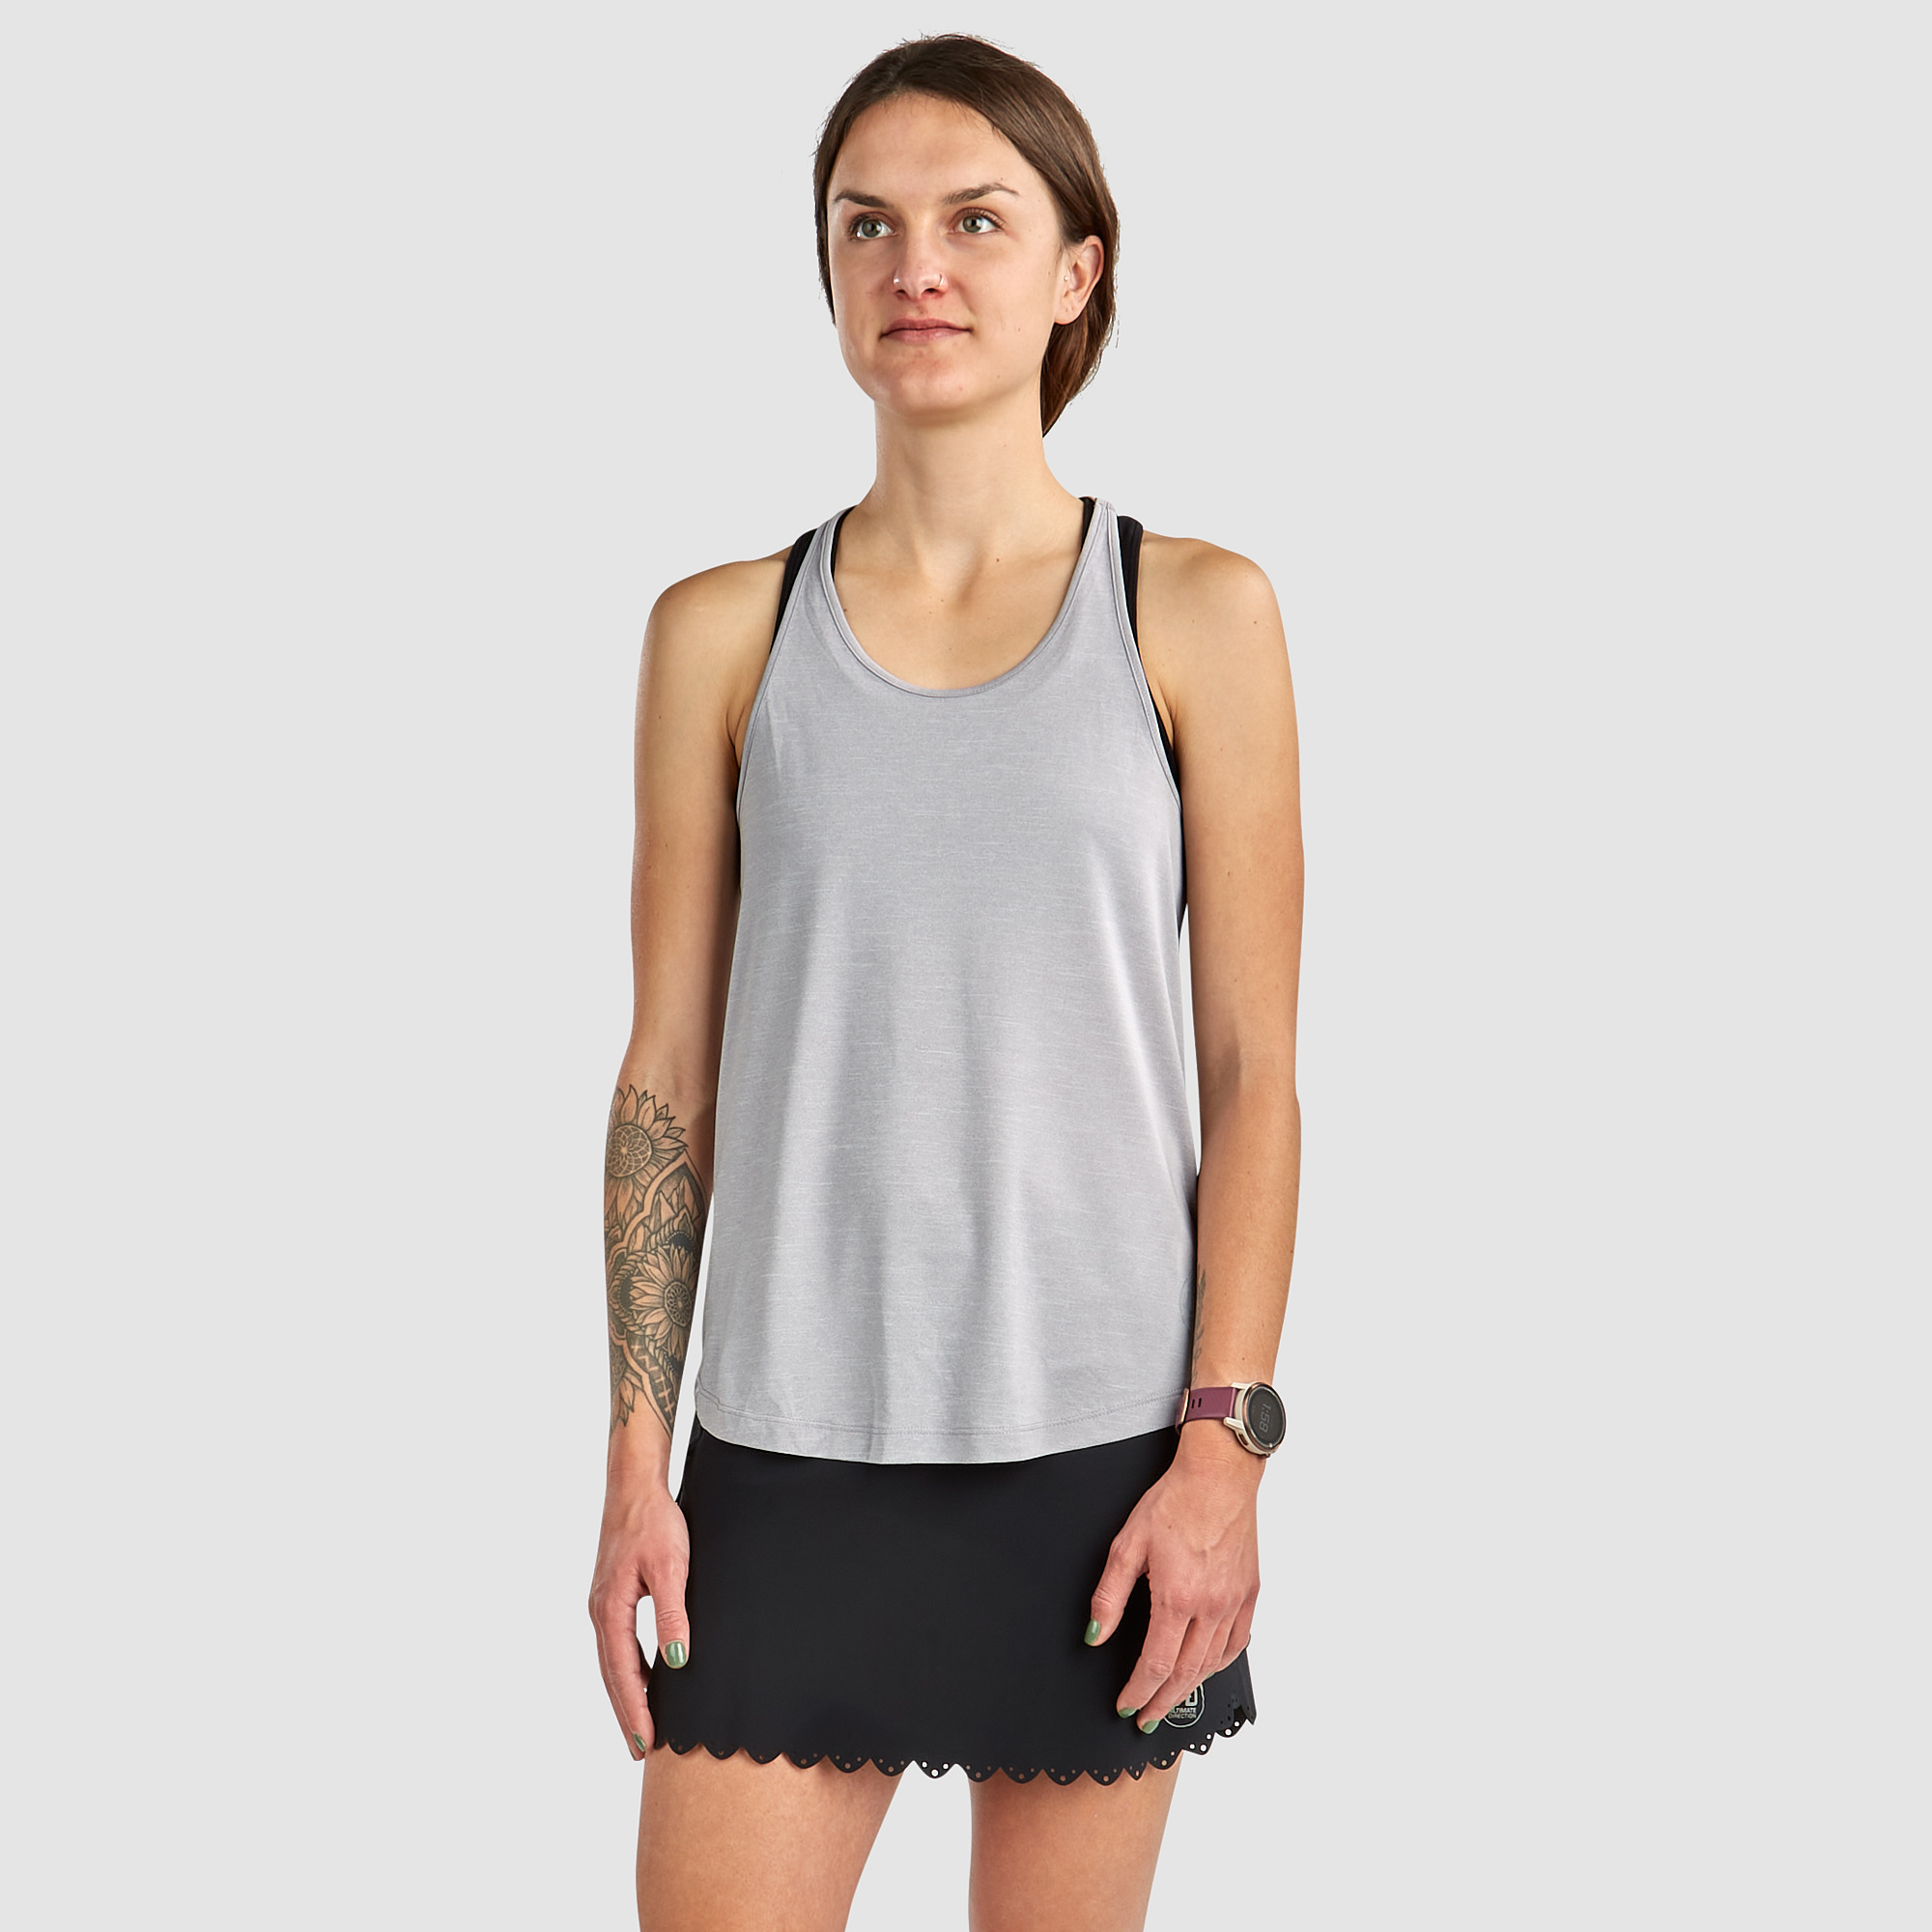 Ultimate Direction Women's Contralis Tank Top in Heather Gray Size Large